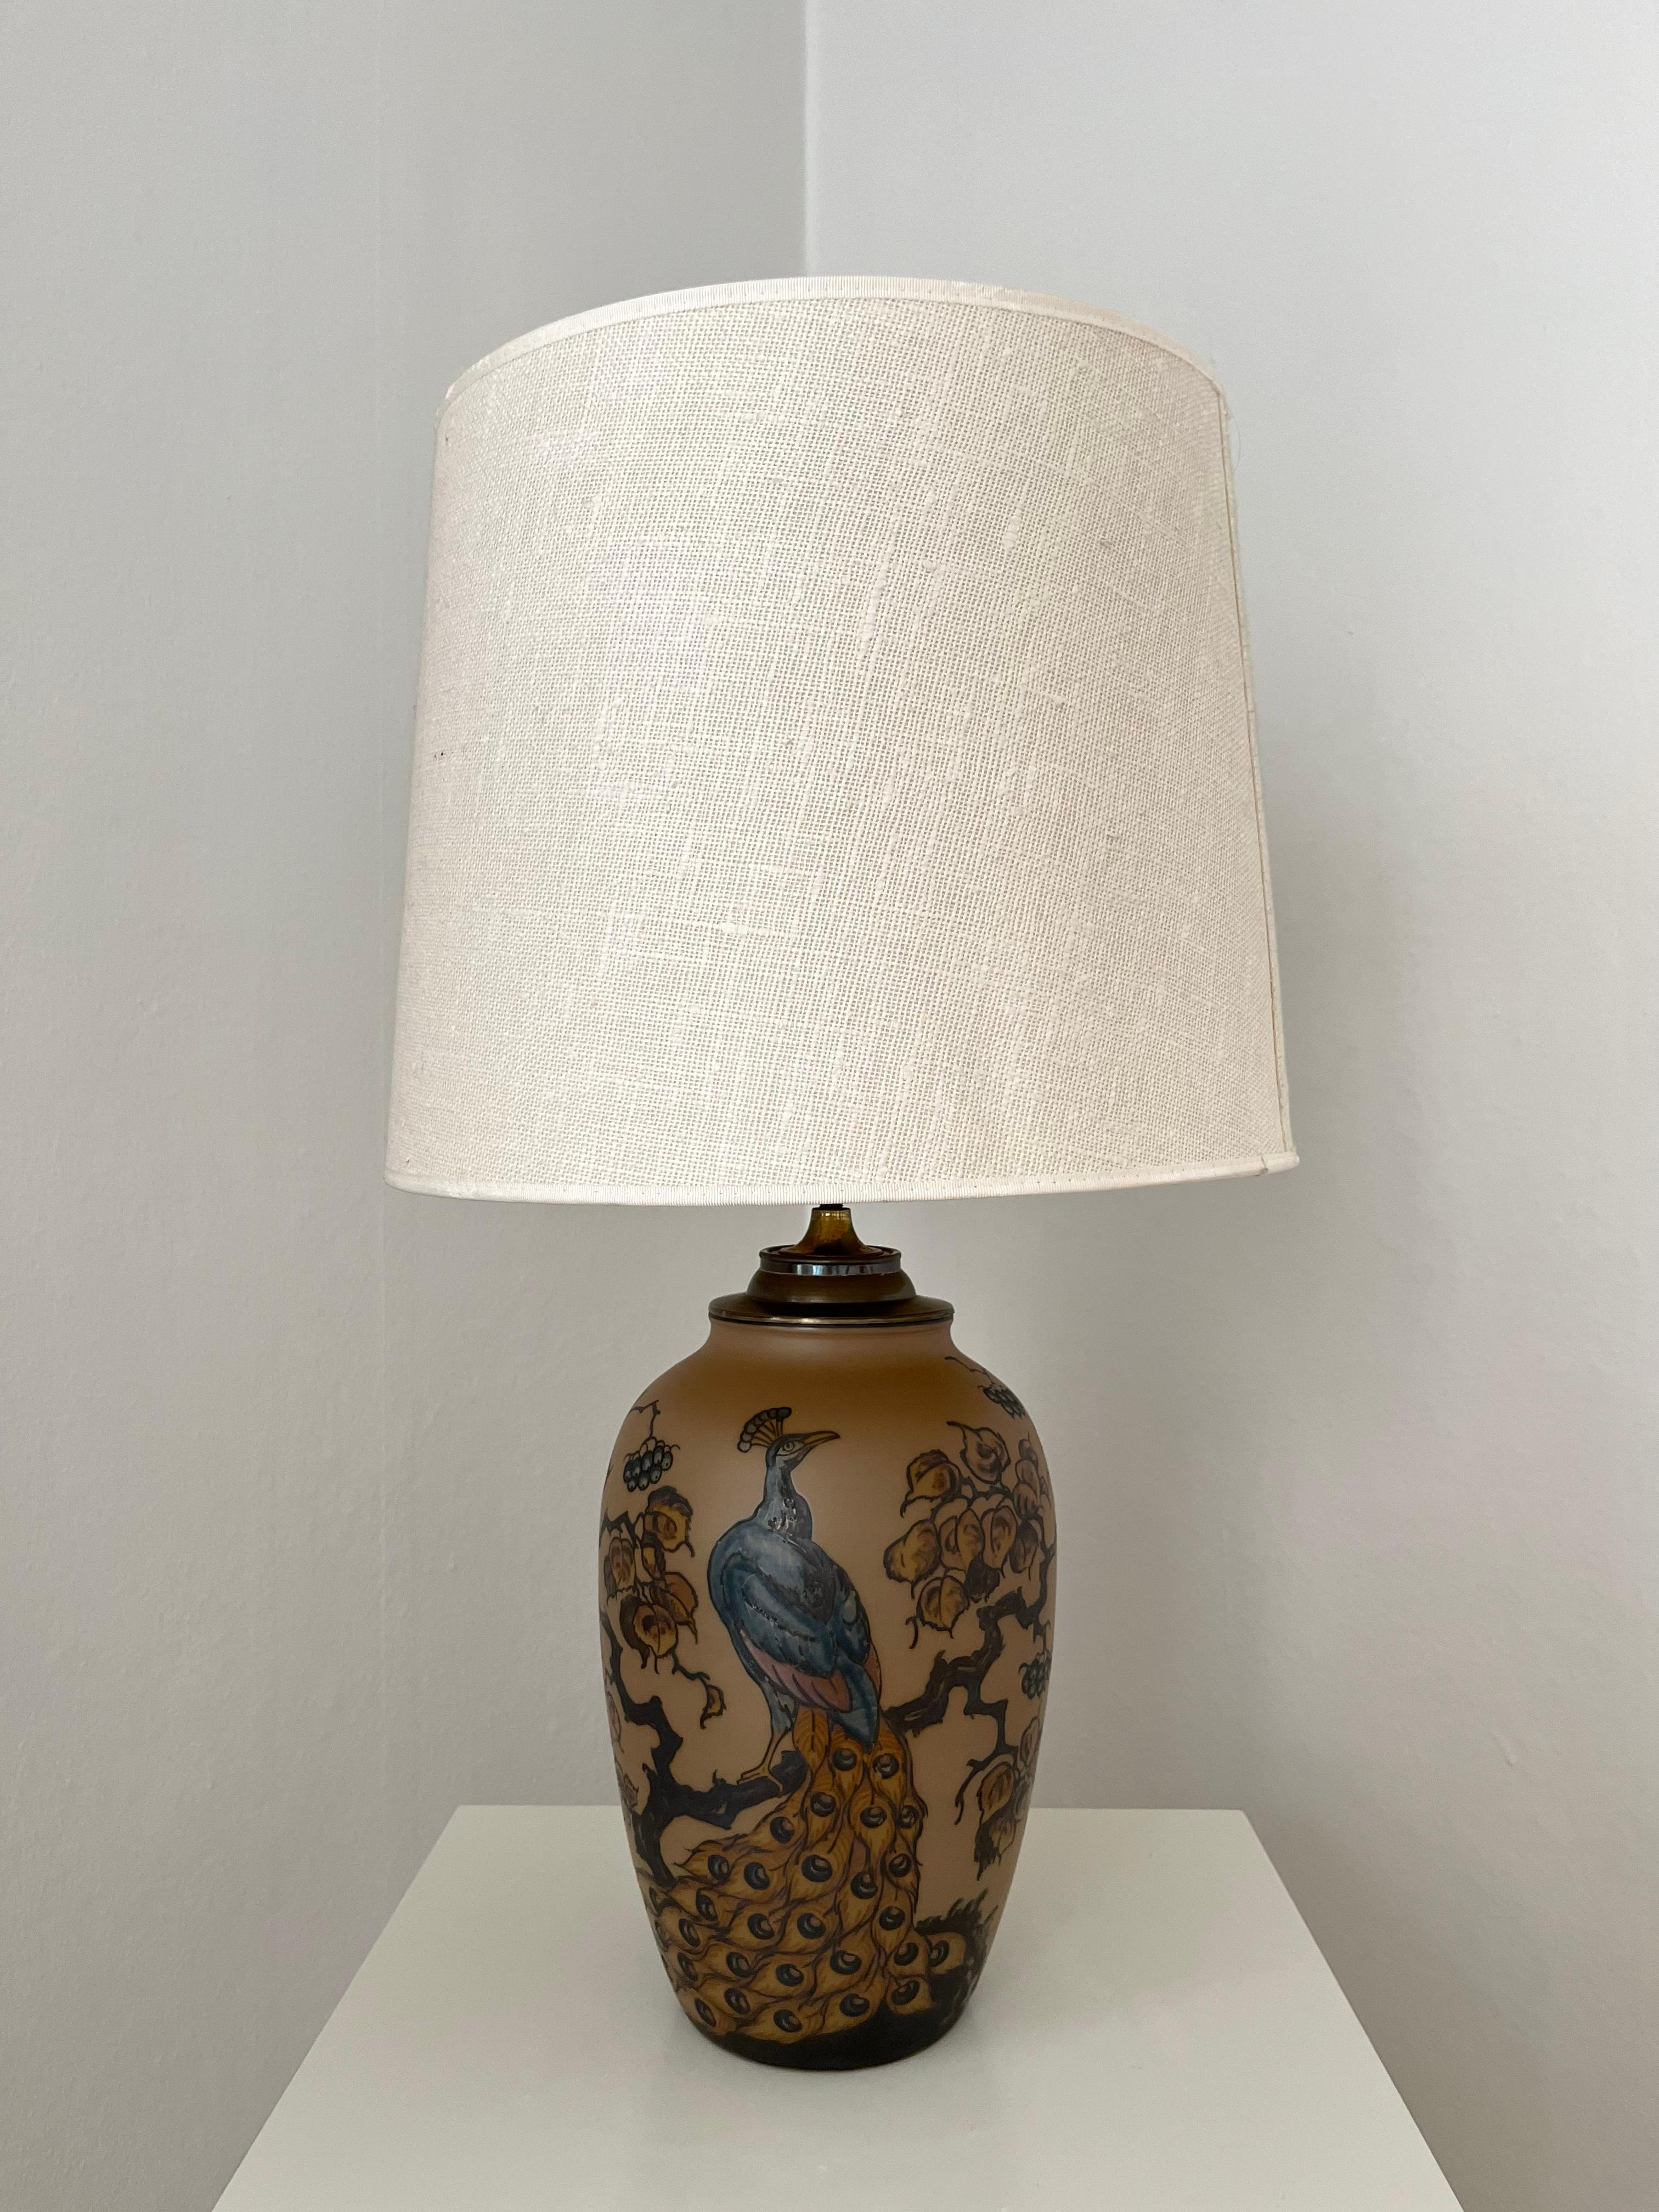 Art nouveau Danish ceramic table lamp with hand decorated peacock, made by L. Hjort ceramic factory. This tall table lamp is from the 1930s and in very good condition. Originally made in 2 pieces, a floor vase and an electric part made from brass,